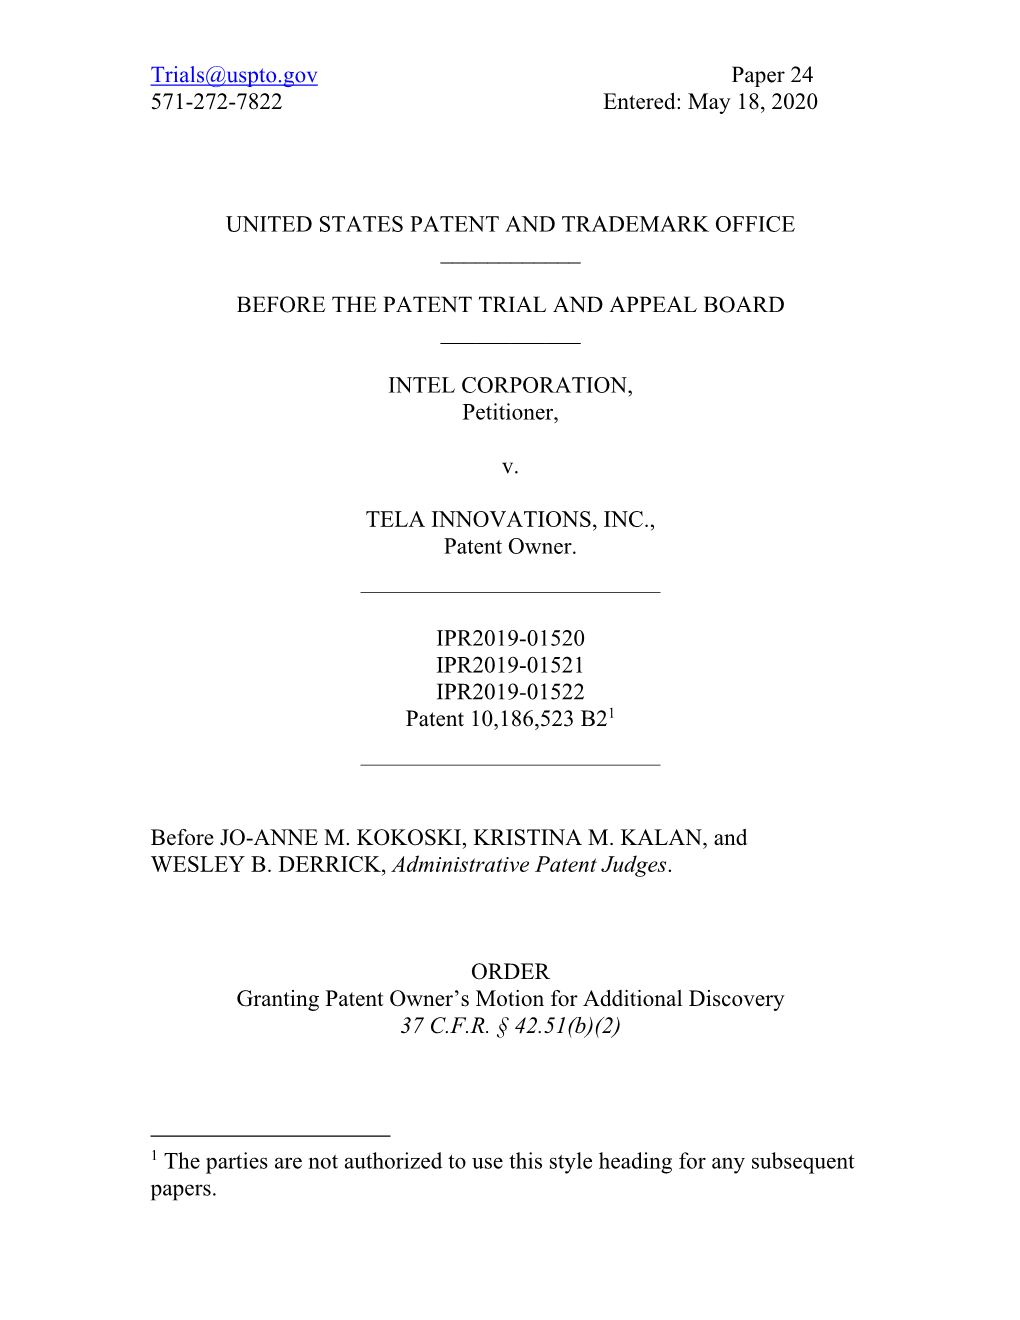 May 18, 2020 UNITED STATES PATENT and TRADEMARK OFFICE